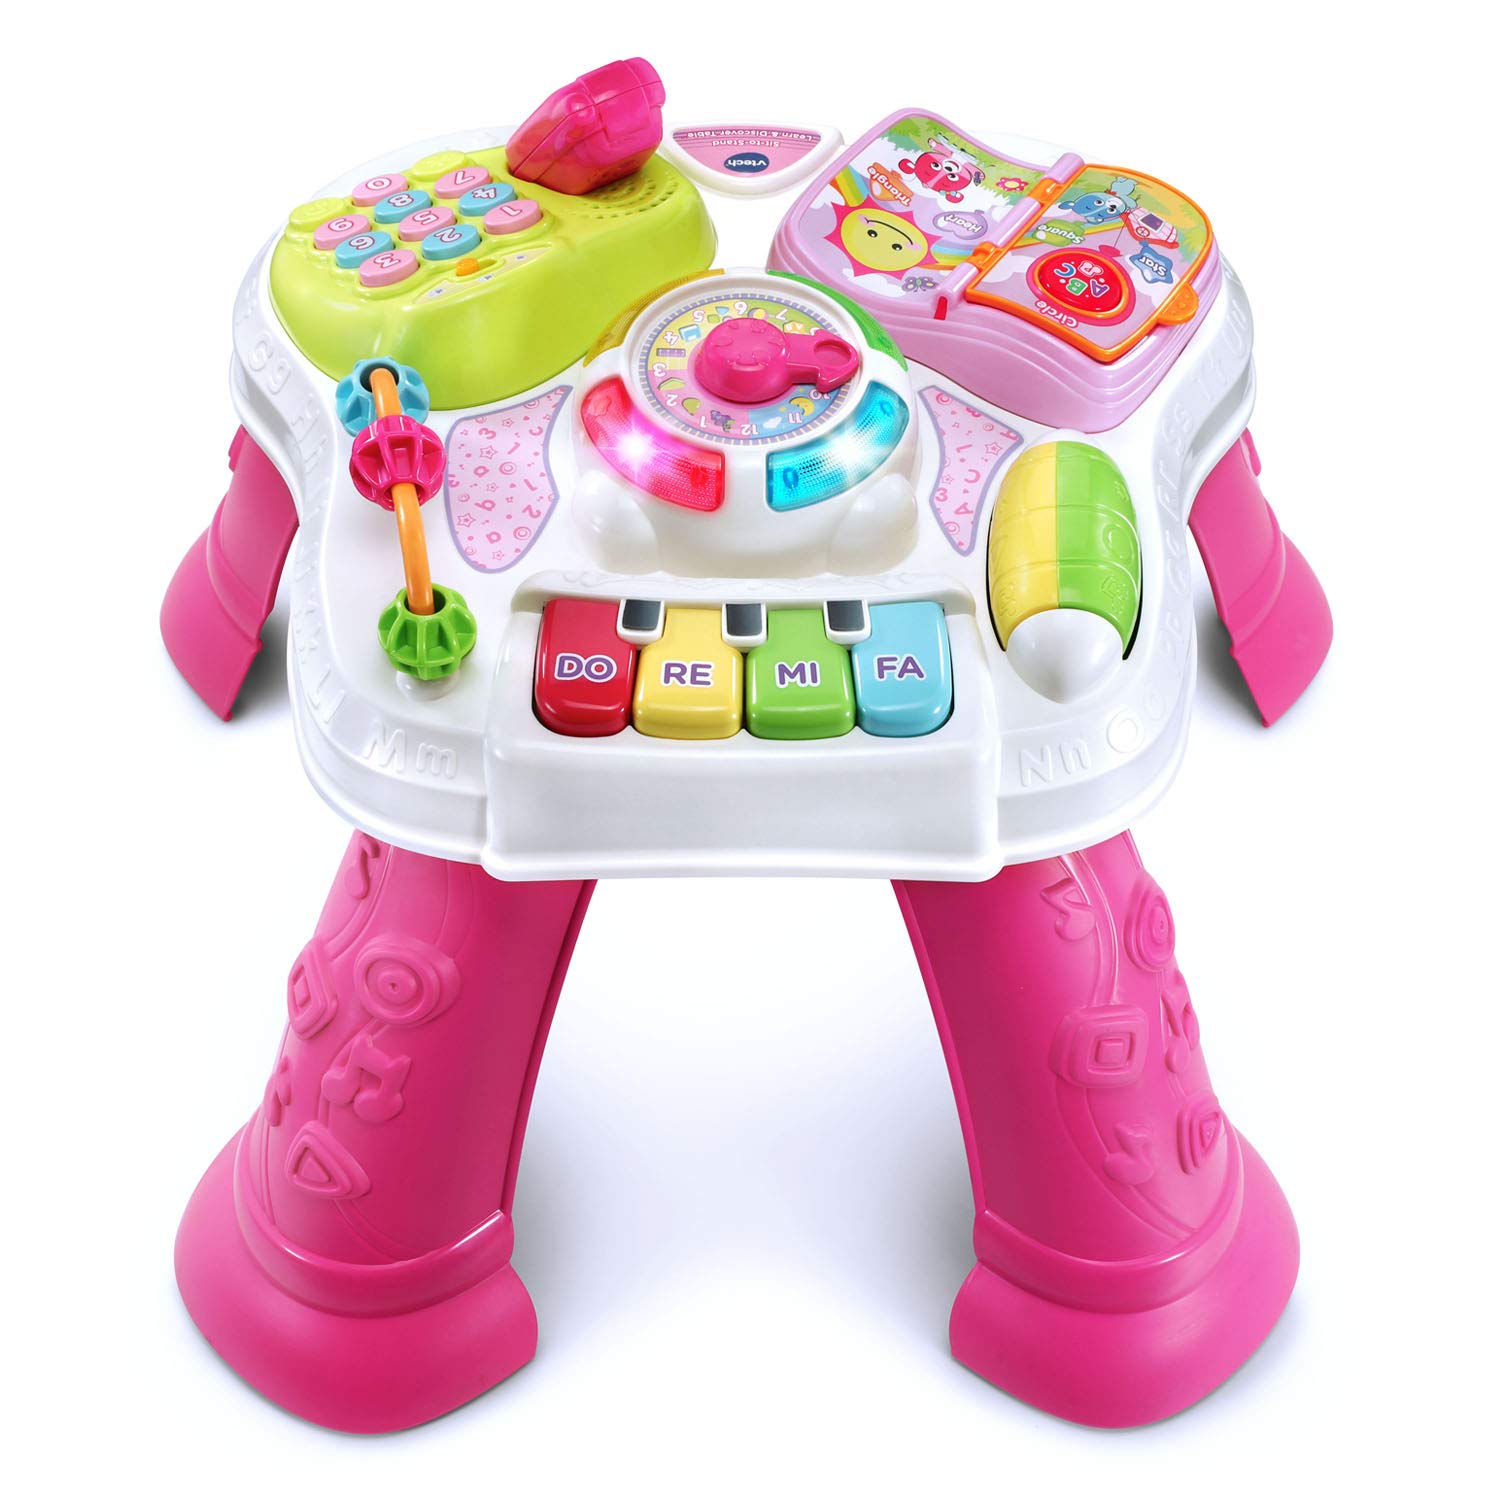 VTech Sit-To-Stand Learn, Discover Table, Pink